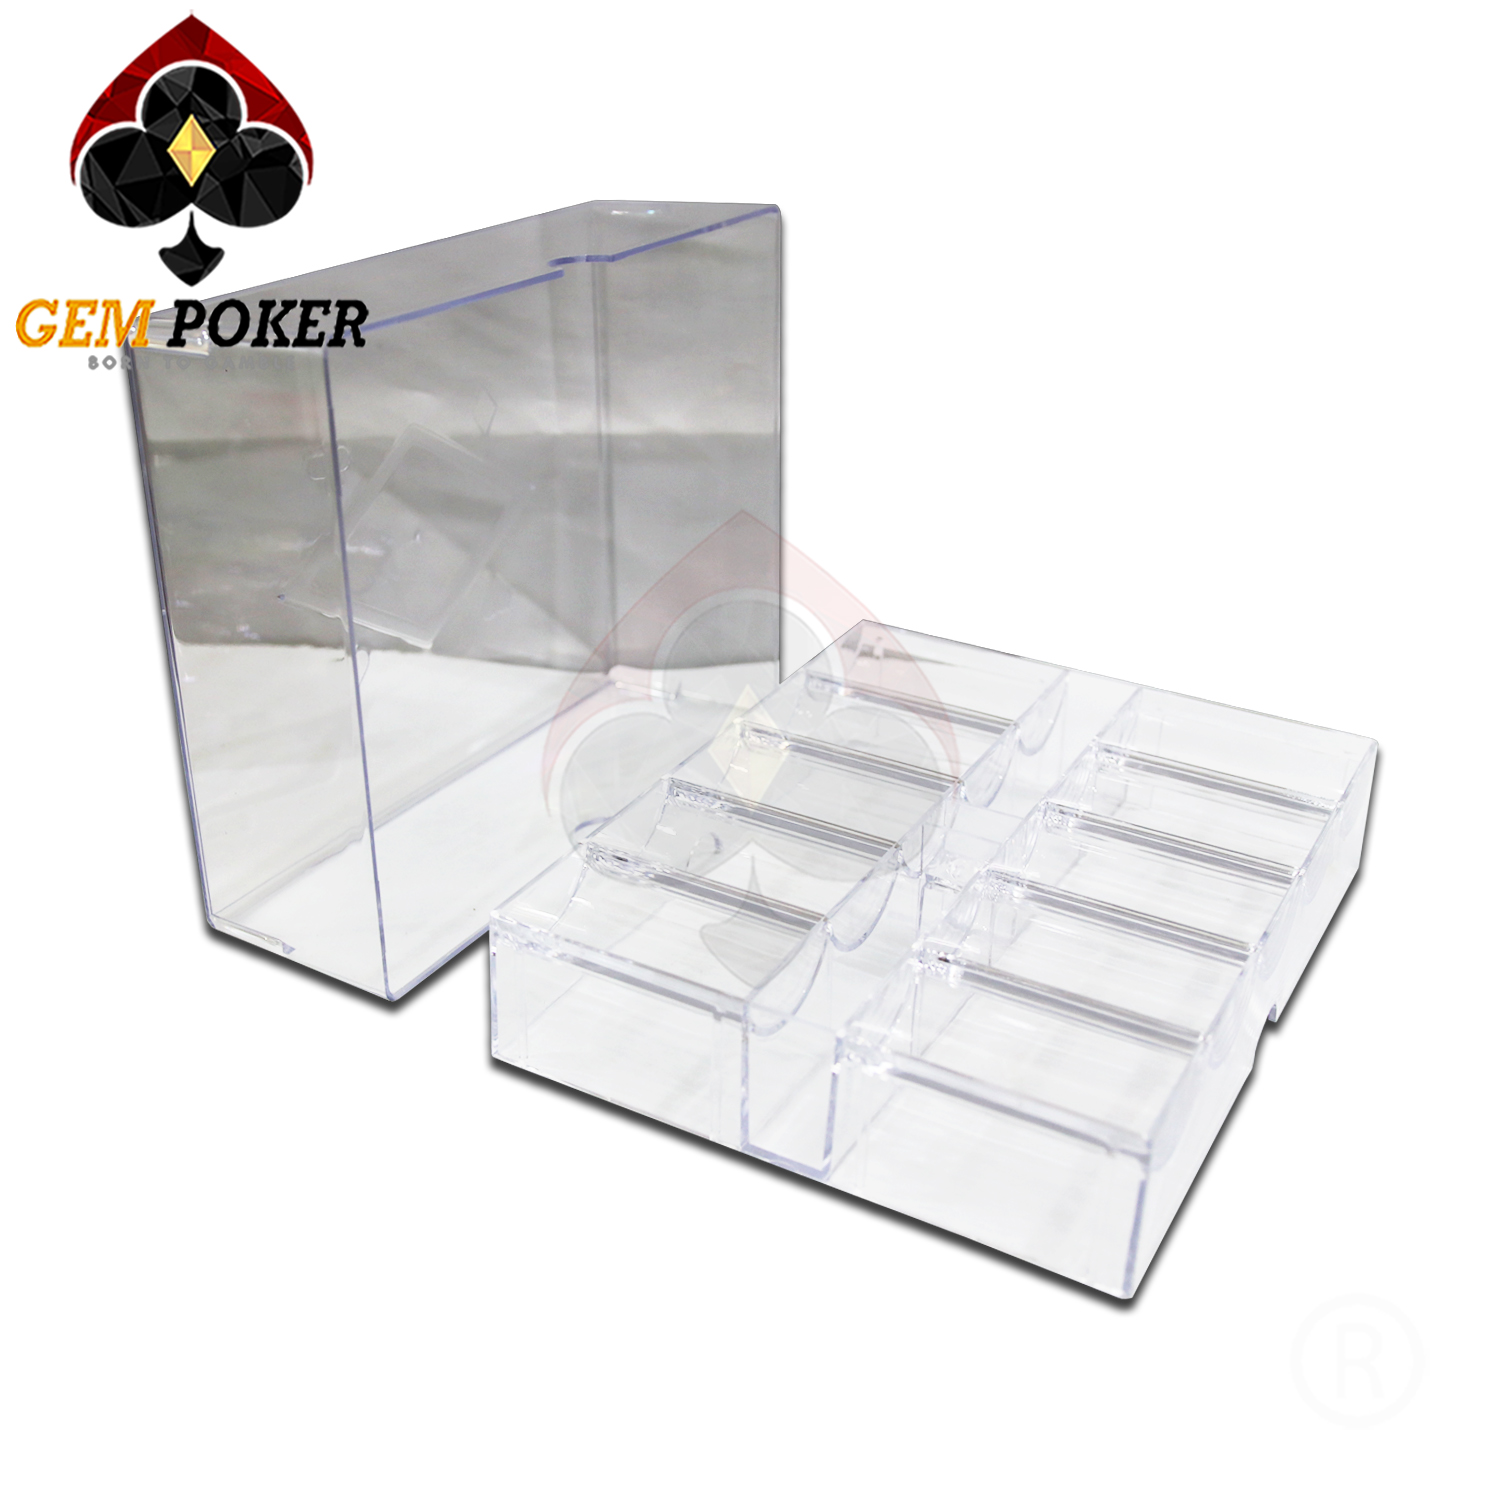 TRAY 200 POKER CHIP WITH LID